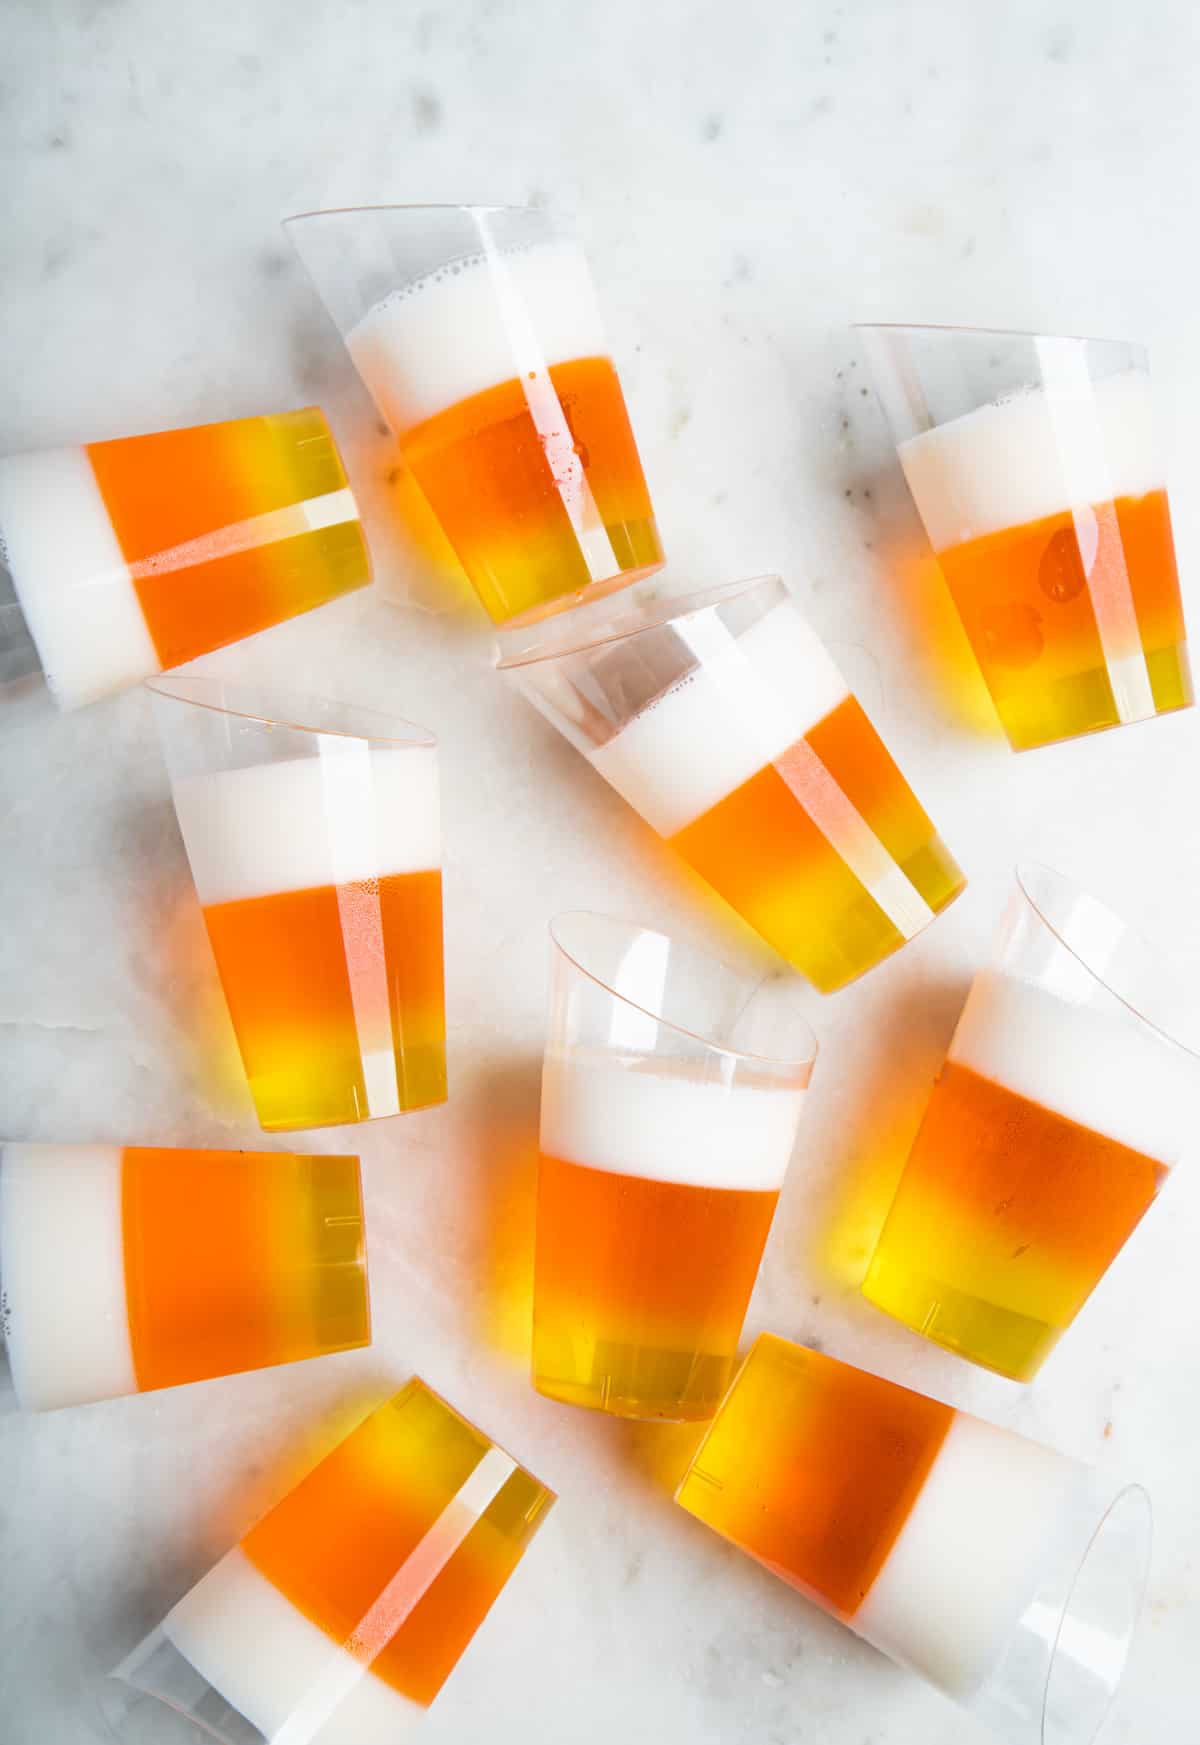 10 candy-corn jello shots scattered on a white table.